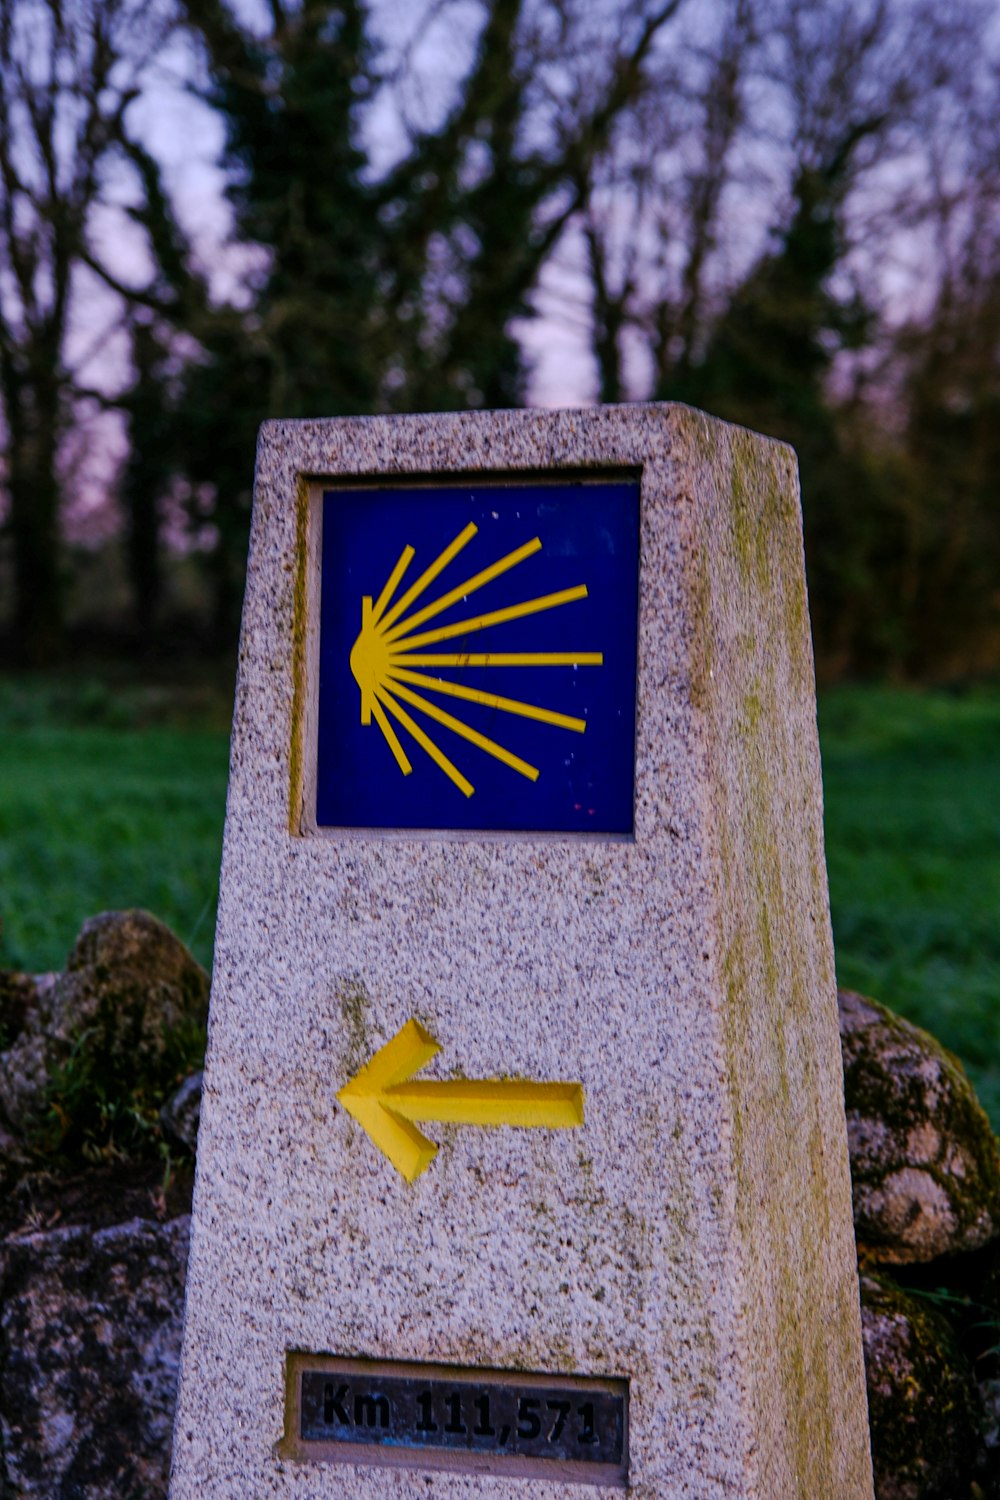 a stone monument with a yellow arrow pointing to the right